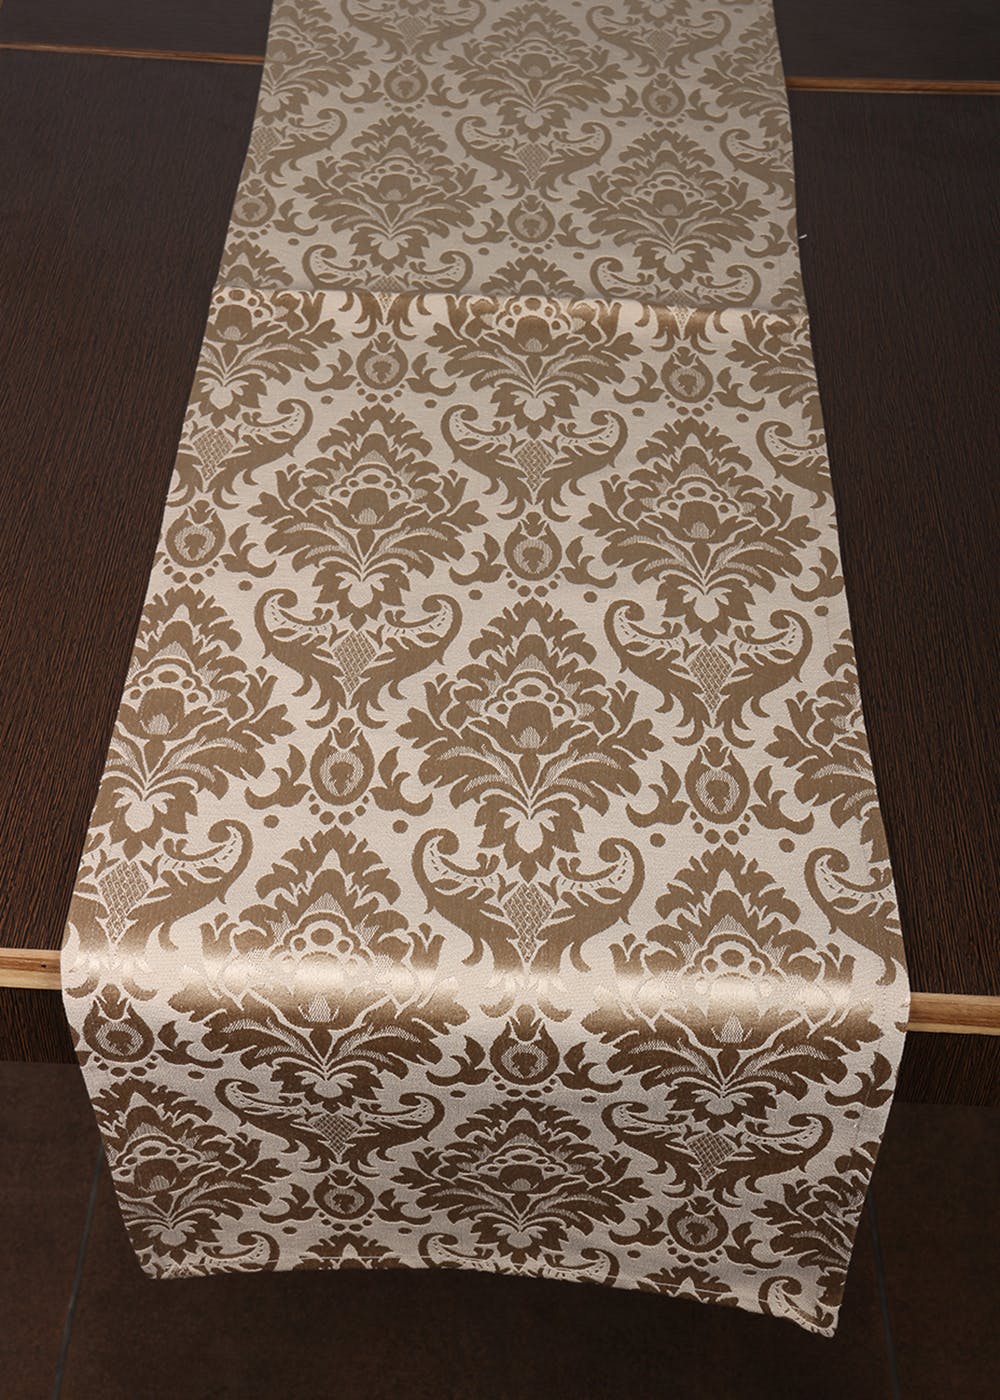 Cotton Jacquard Self Design Damask Gold Table Runner 6 Seater (13x84 inches)